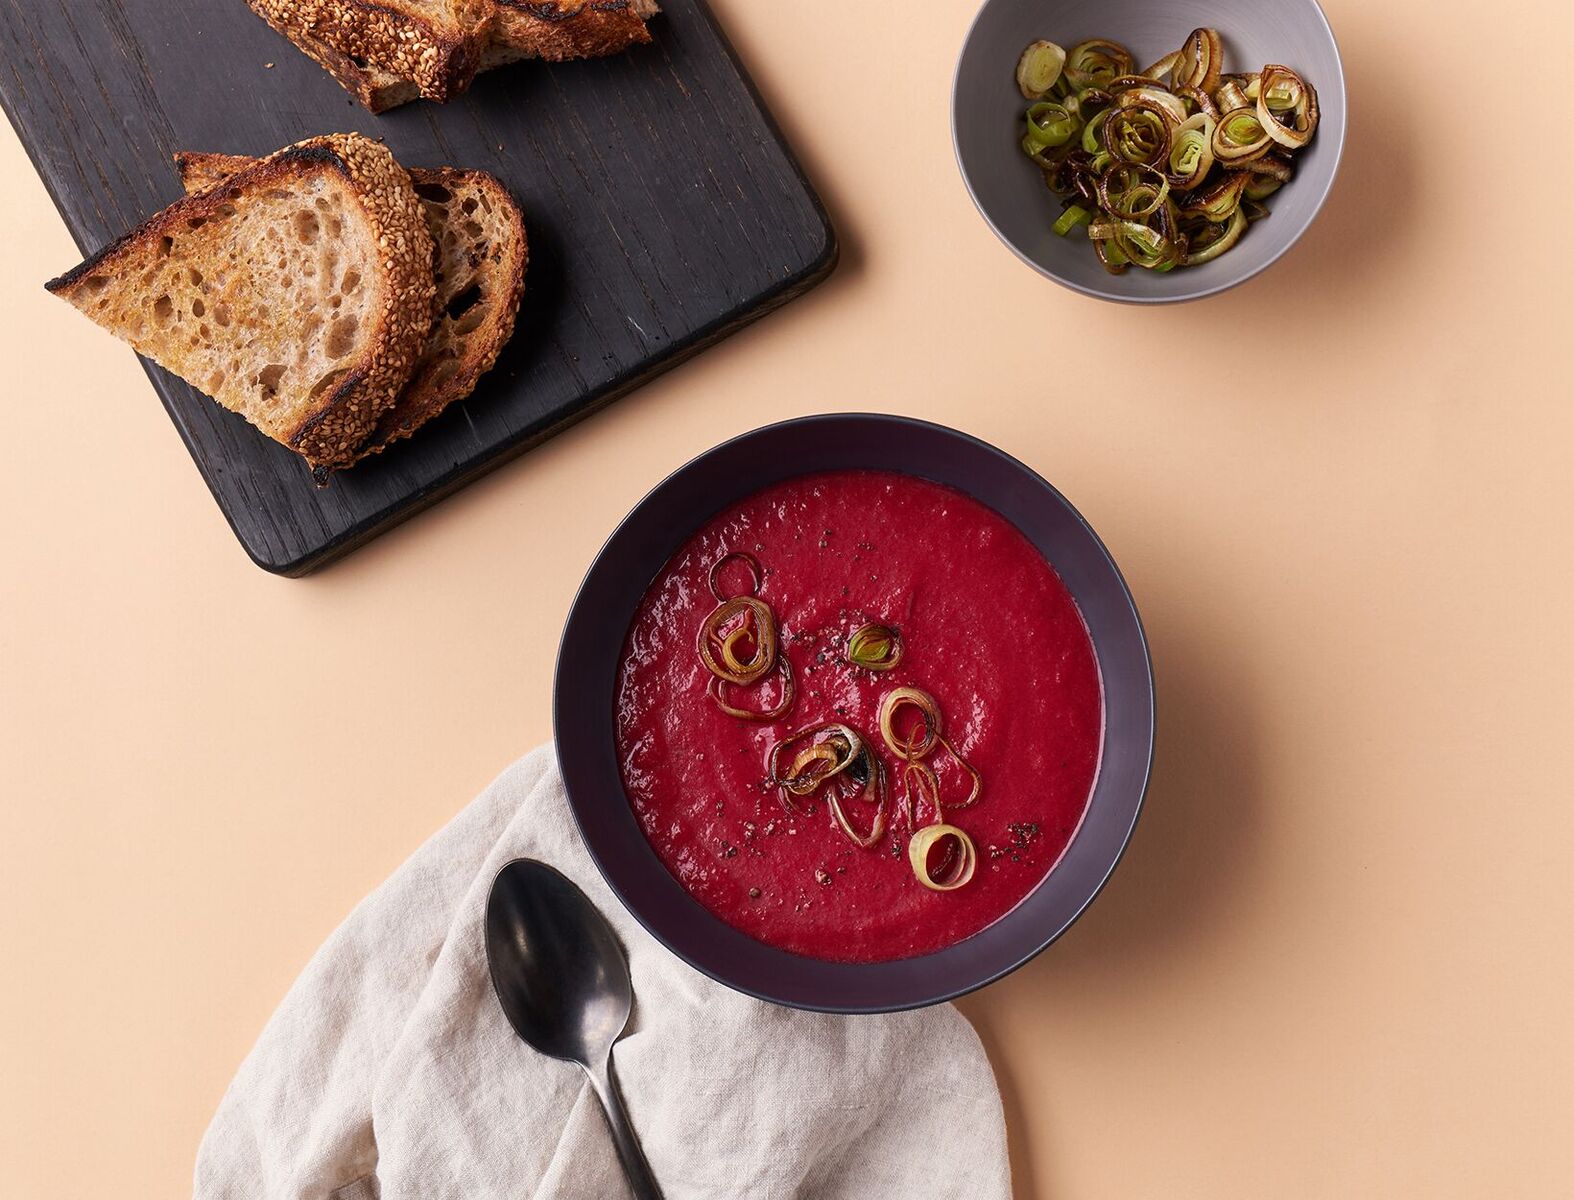 Roasted Beet and Garlic Prebiotic Soup with Crispy Leek Croutons